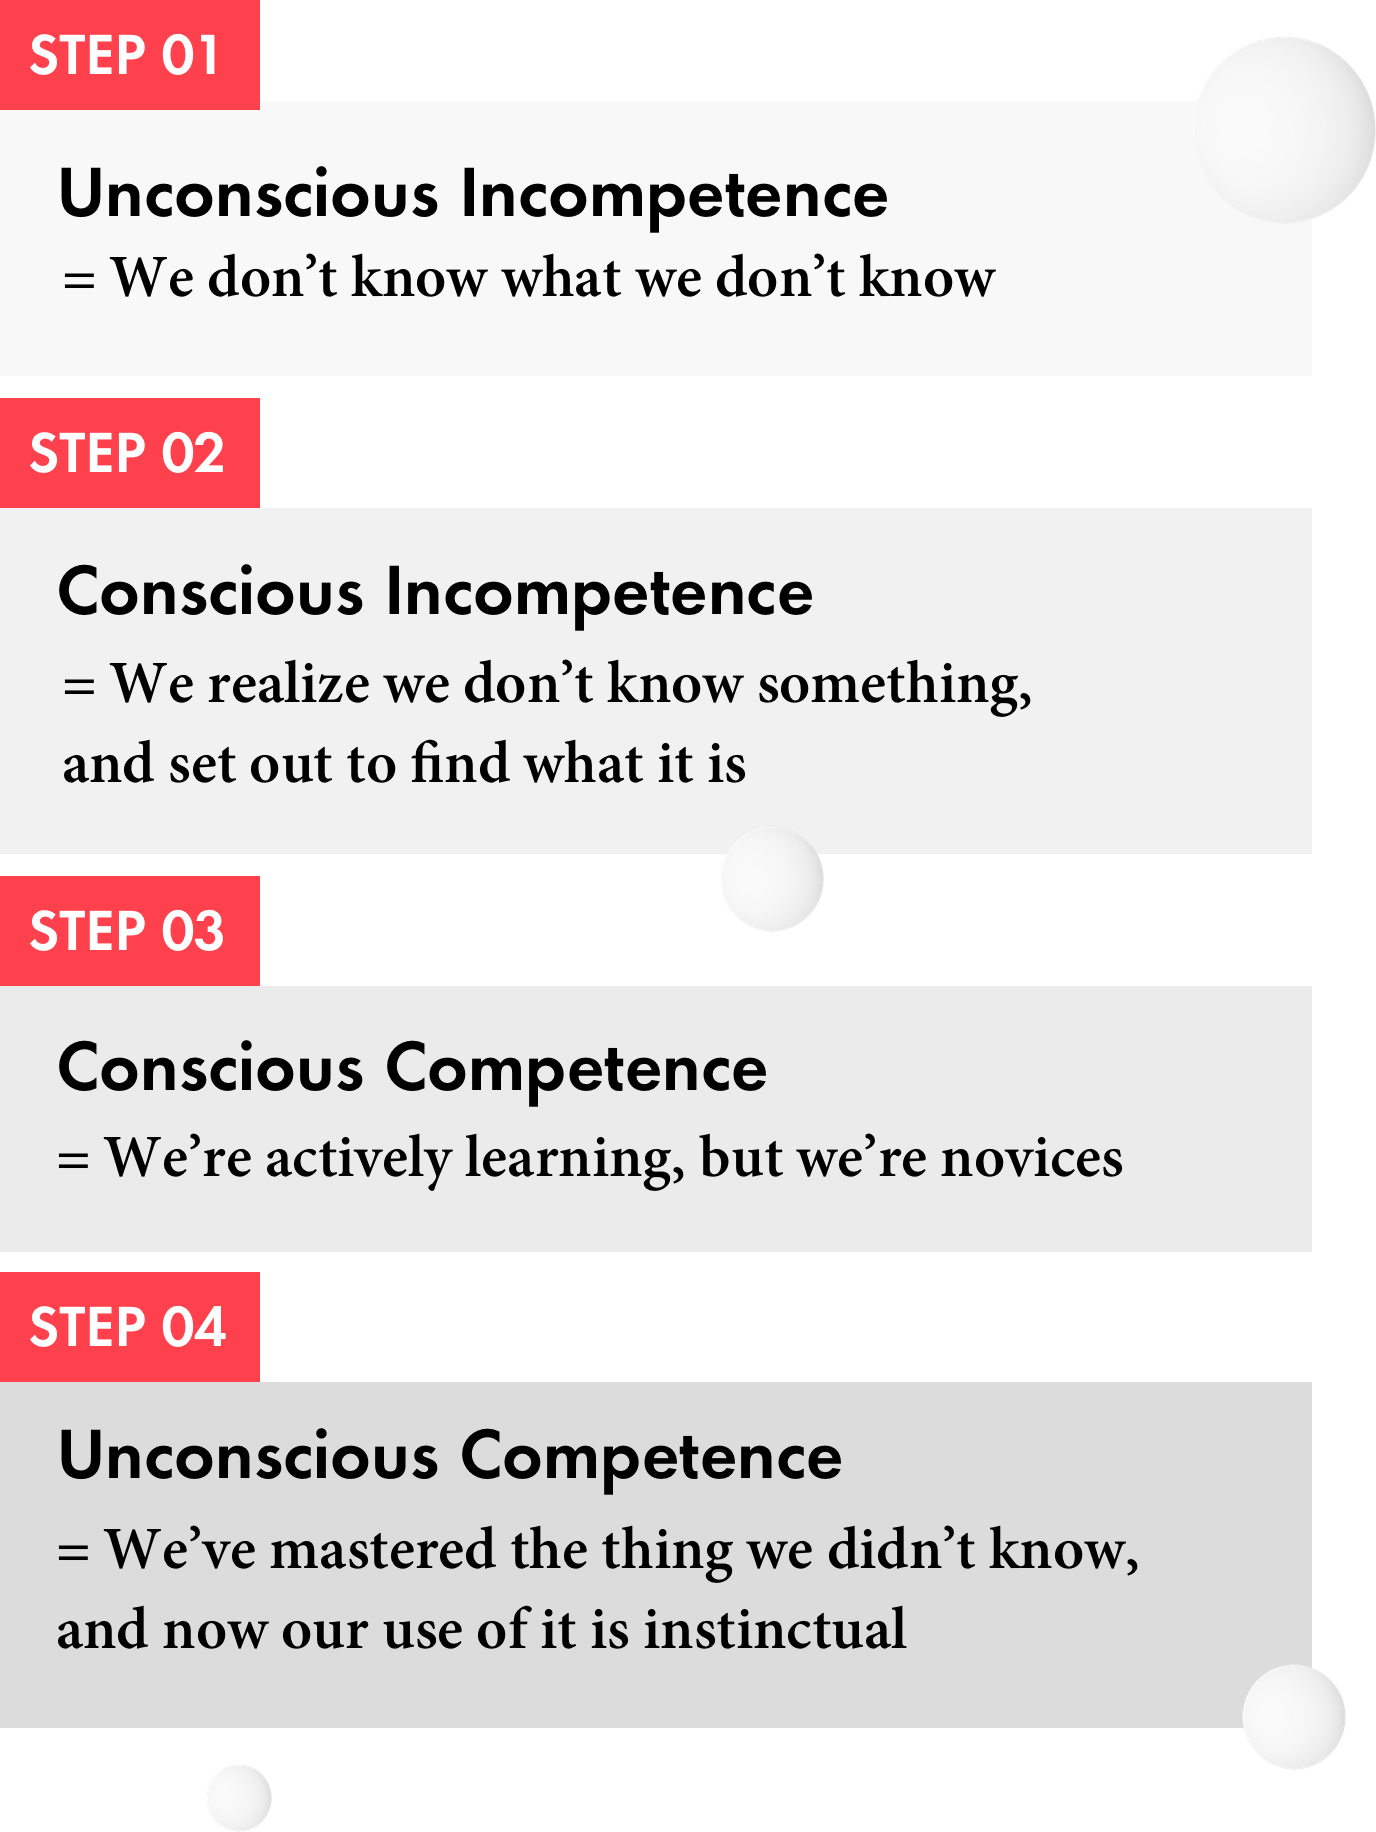 Graphic: Steps 1-4 Unconscious Incompetence, Conscious Incompetence, Conscious Competence, Unconscious Competence